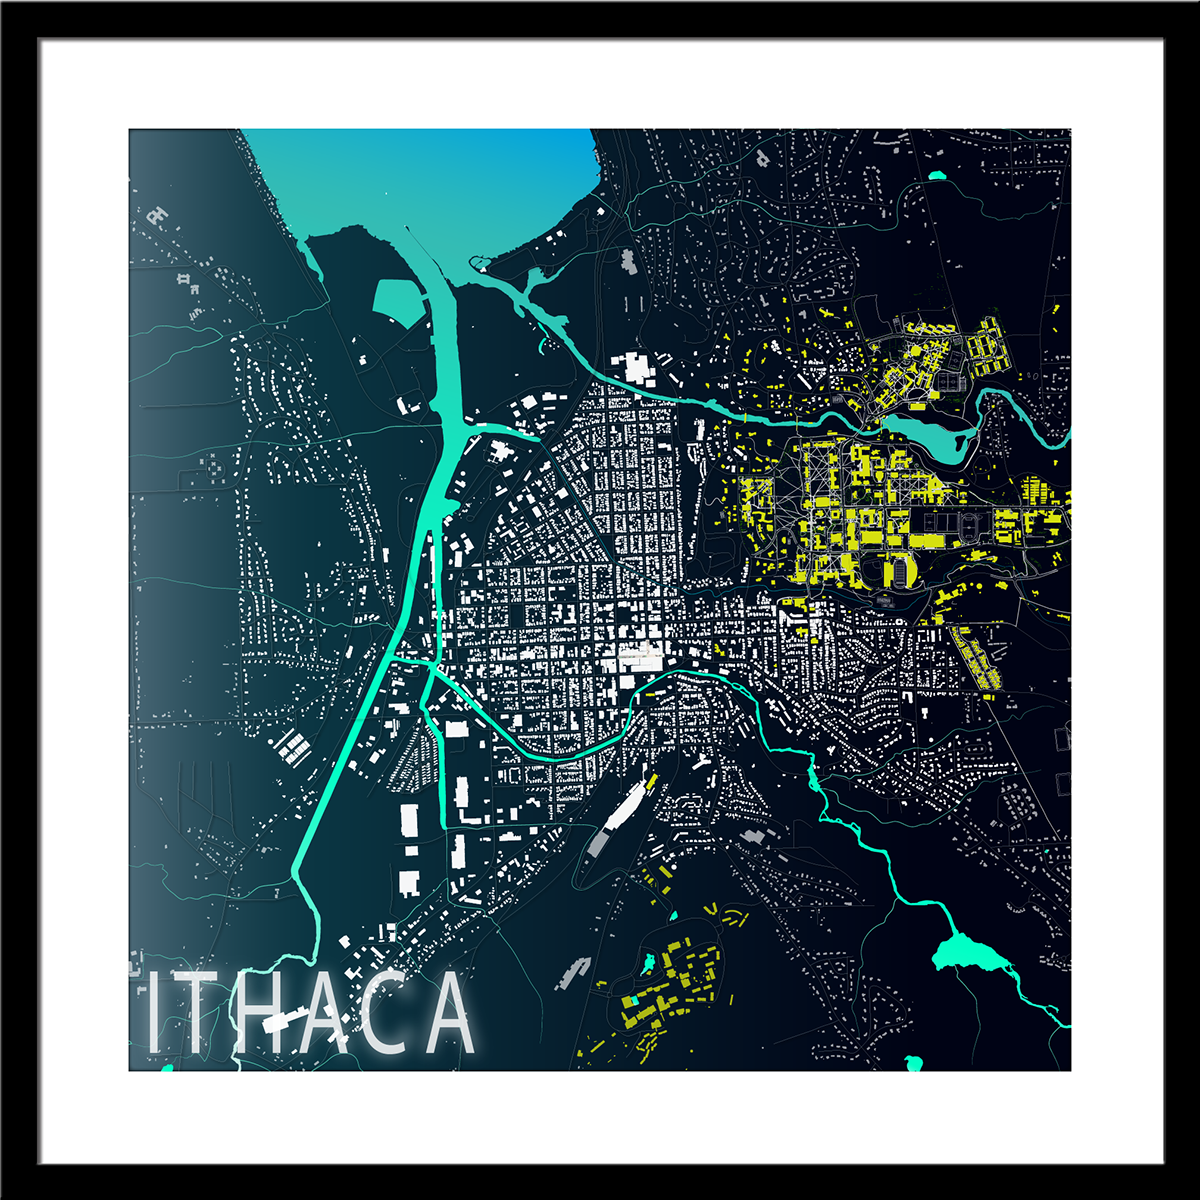 ithaca New York Upstate New York Ithaca College Cornell University GIS cartography maps hydrology south hill campus map